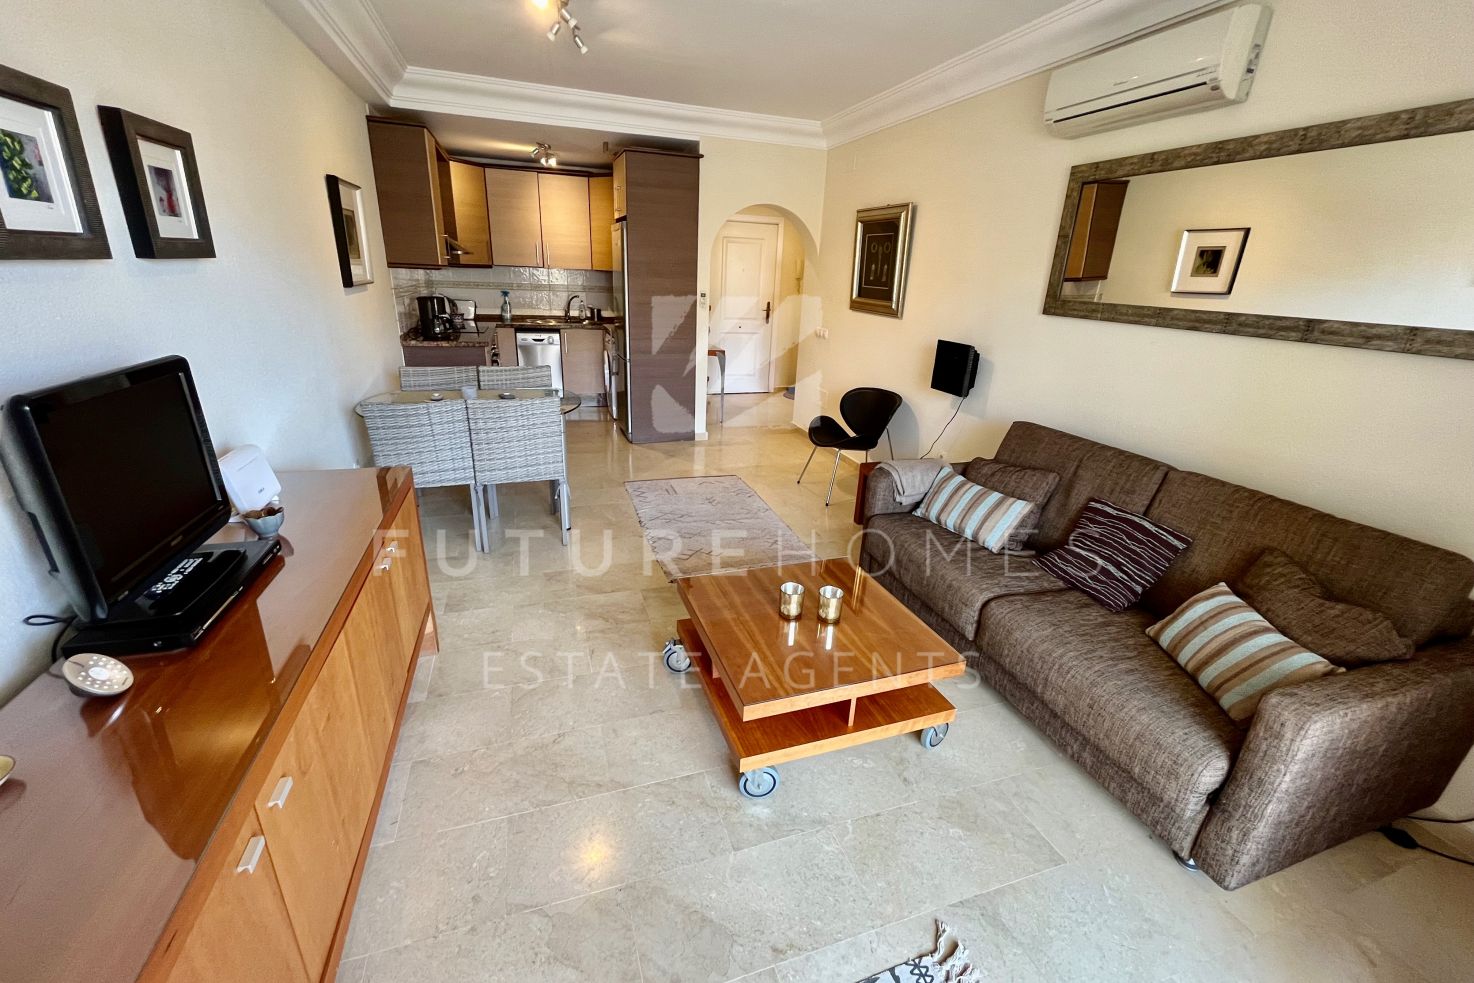 Spacious and impeccable 1 bedroom apartment in Estepona port!